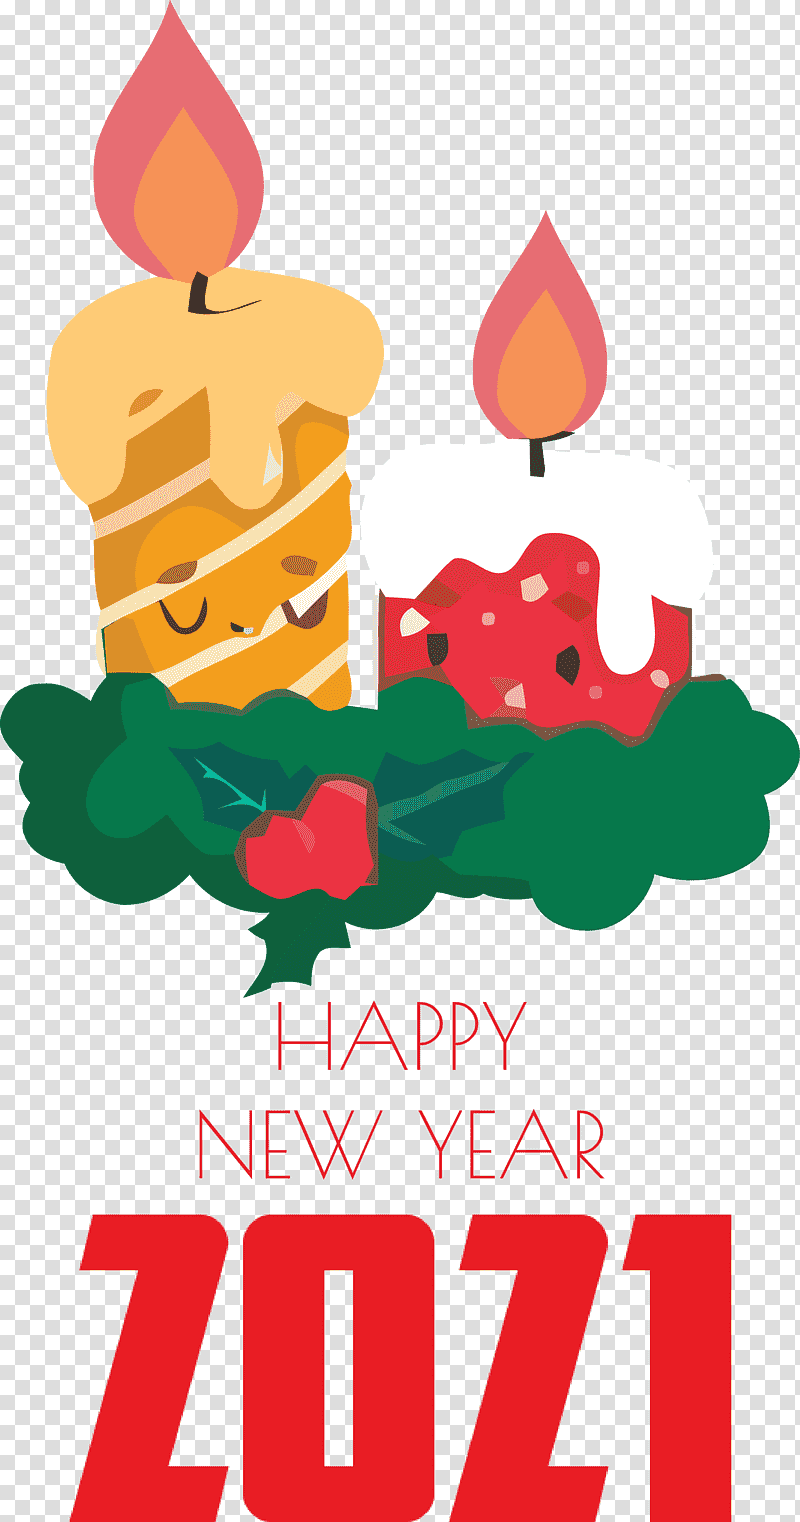 2021 Happy New Year 2021 New Year, Creativity, Watermark, Editing, Macro, Christmas Day, Festival transparent background PNG clipart